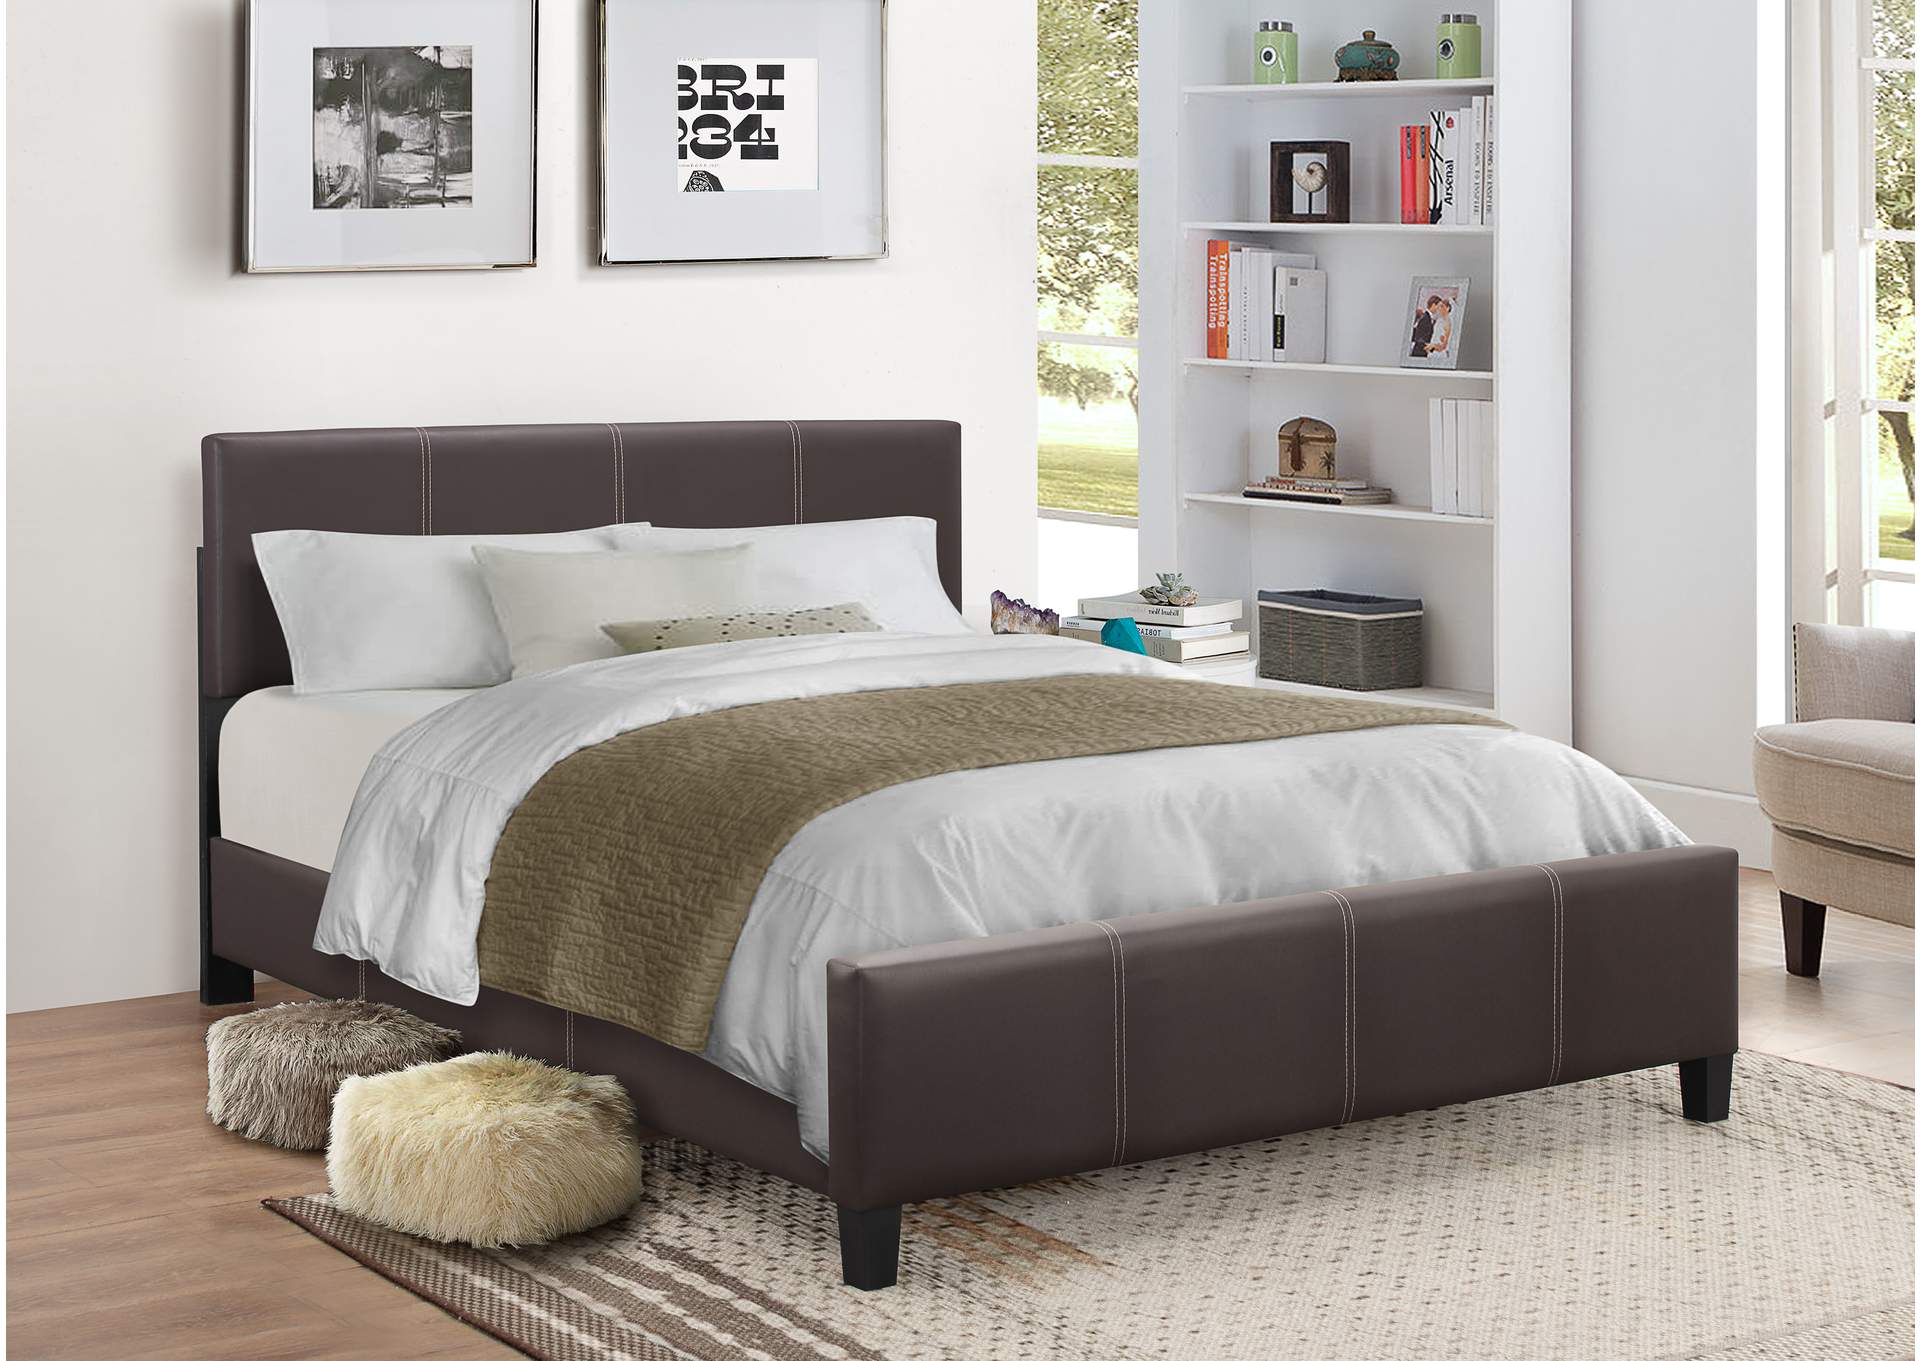 Brown King Bed,Global Trading